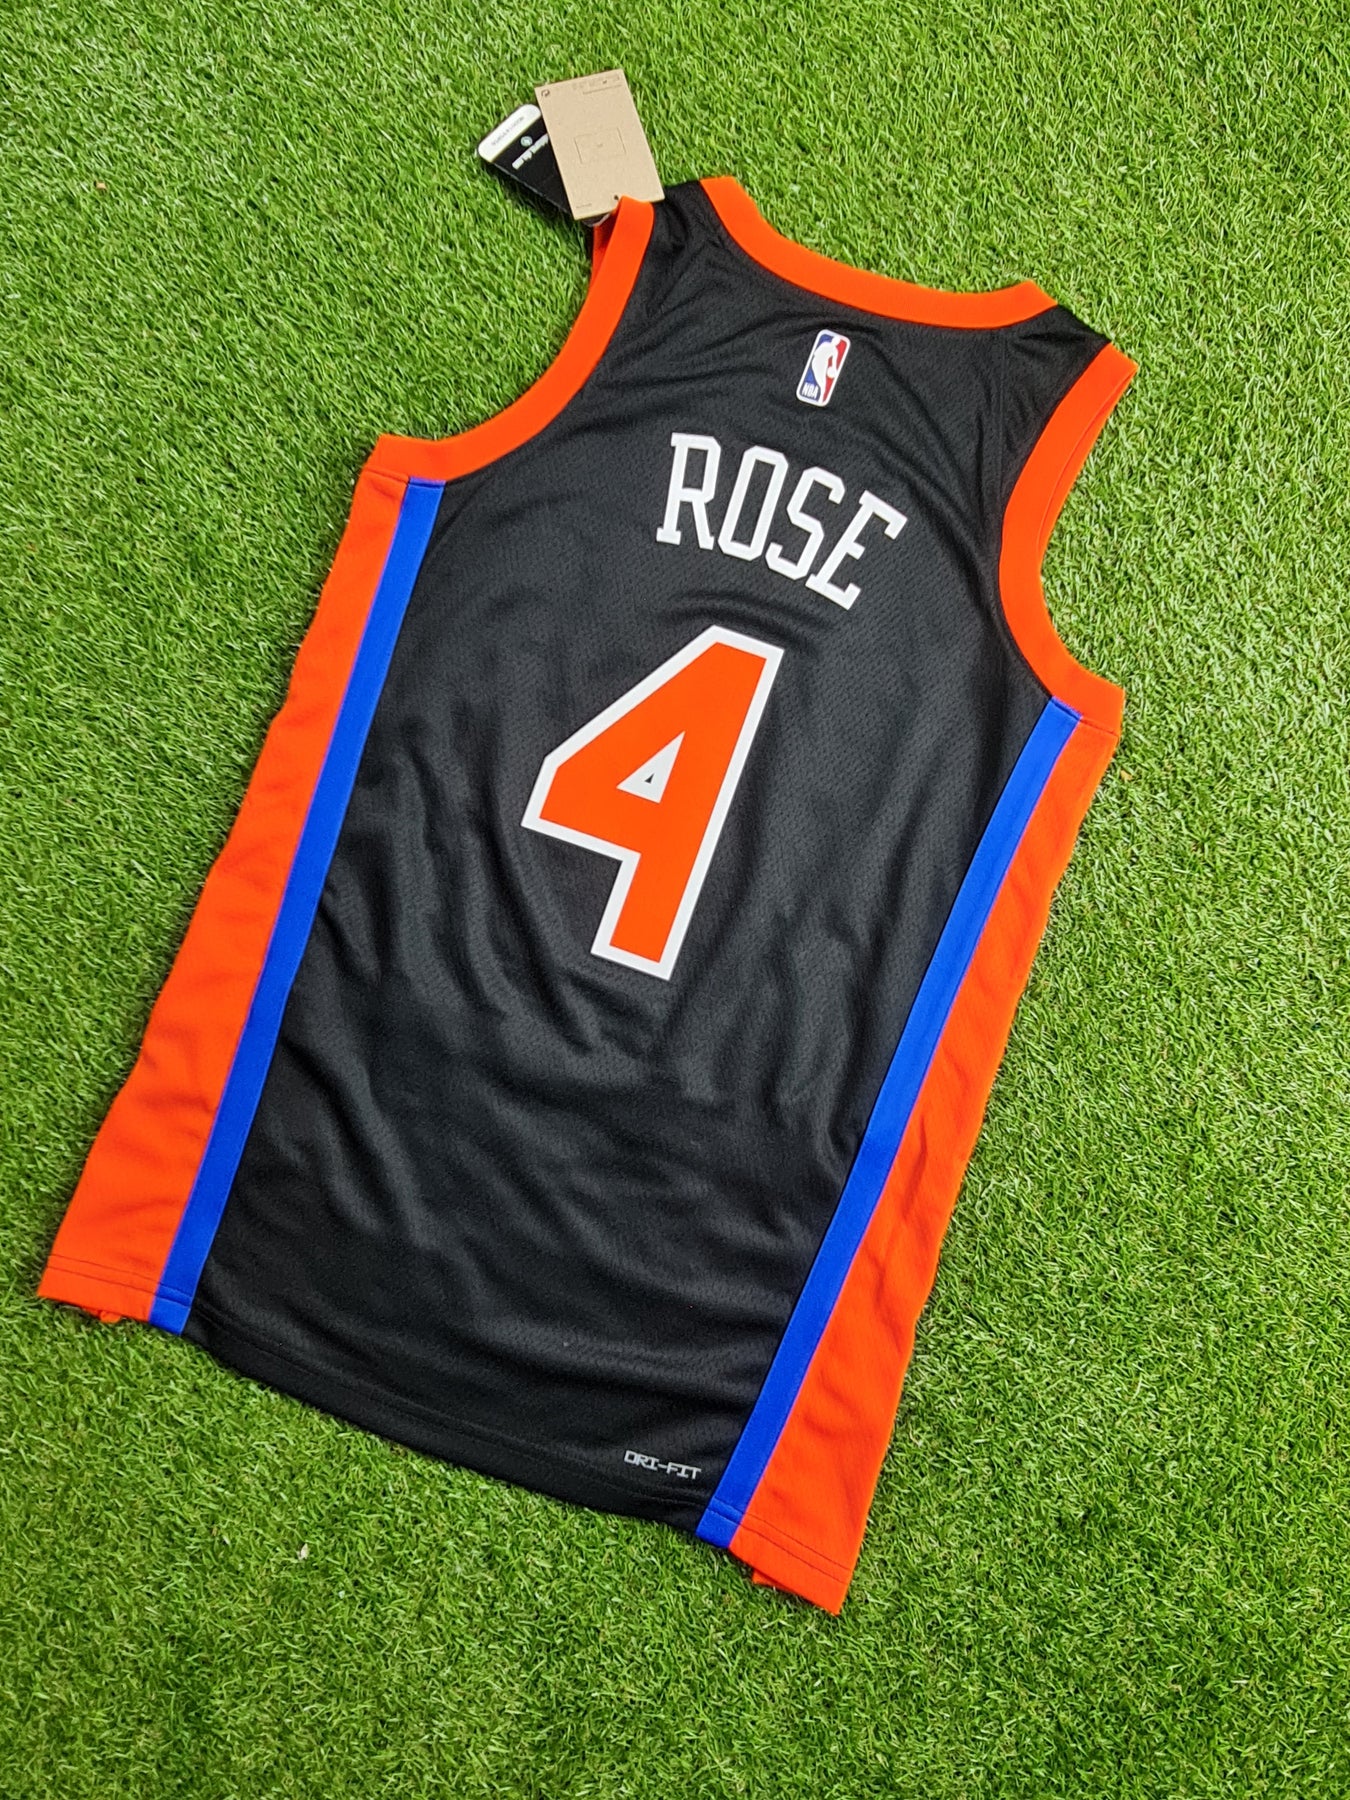 22-23 Statement Edition Jersey, The 22-23 Statement jersey is coming! Sign  up and be the first to know when these jerseys are available for pre-sale.   By New York Knicks